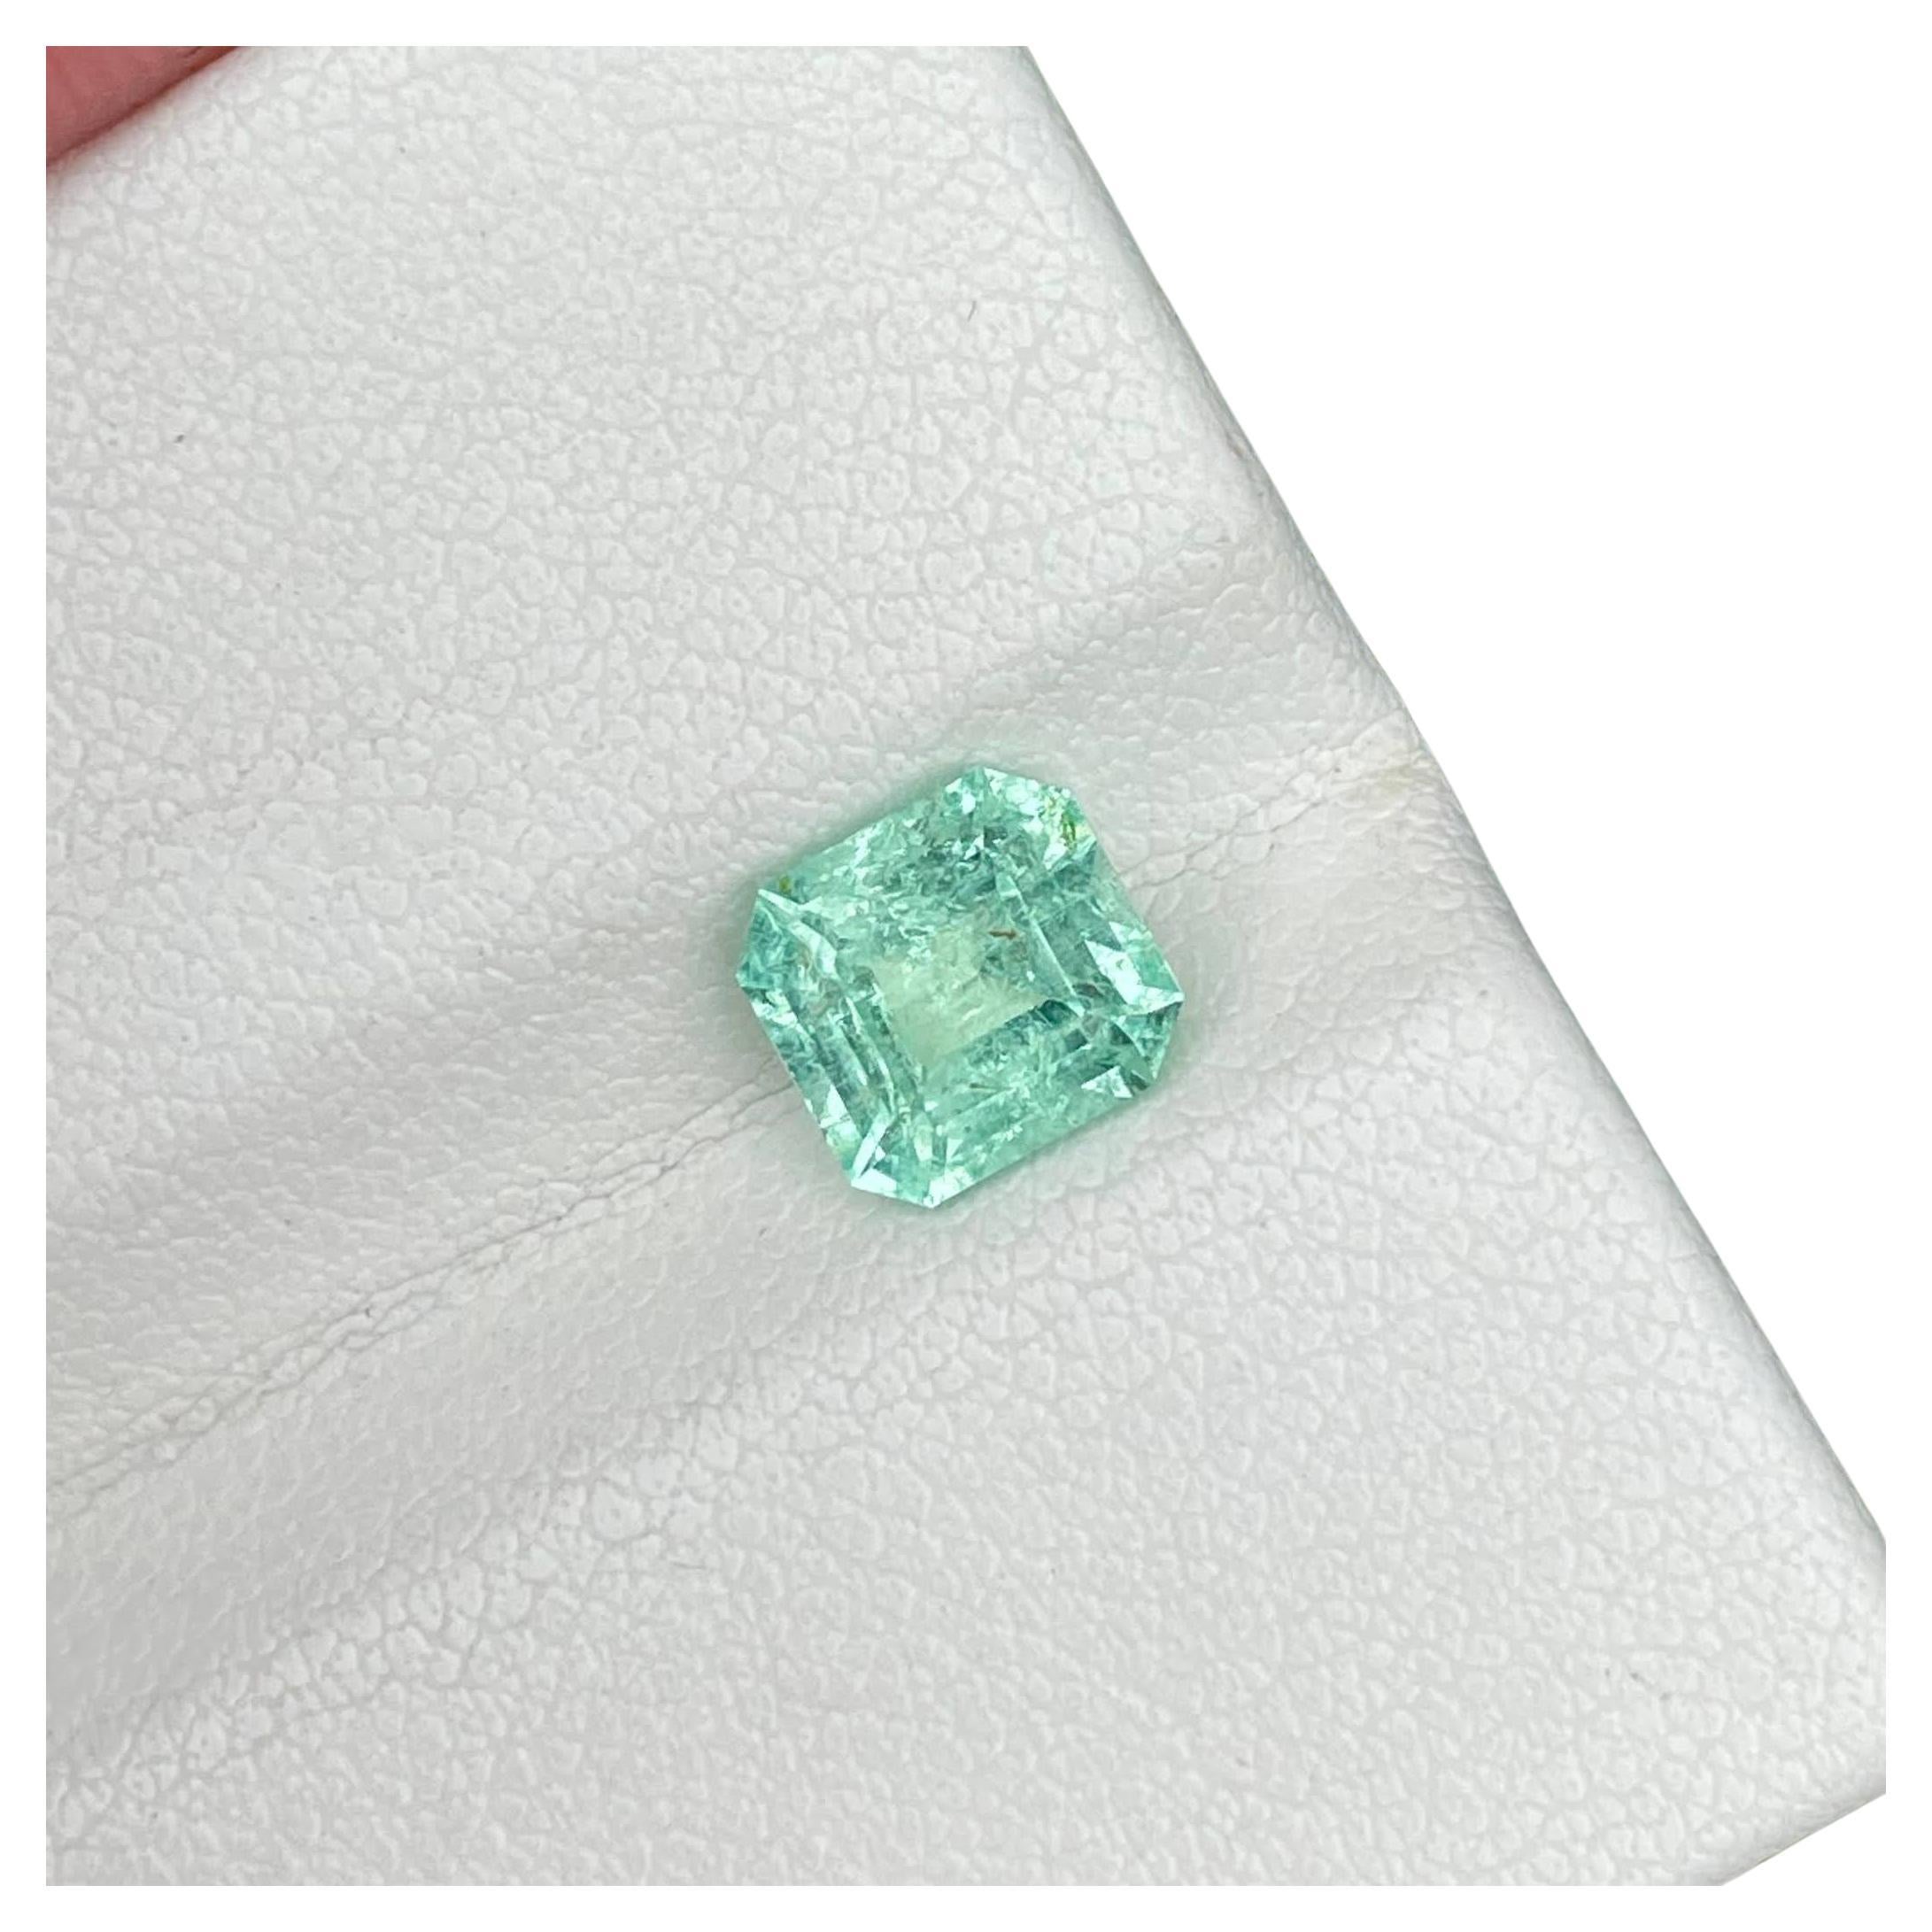 1.35 Carats Loose Emerald Stone Emerald Cut Natural Gemstone From Afghanistan For Sale 1